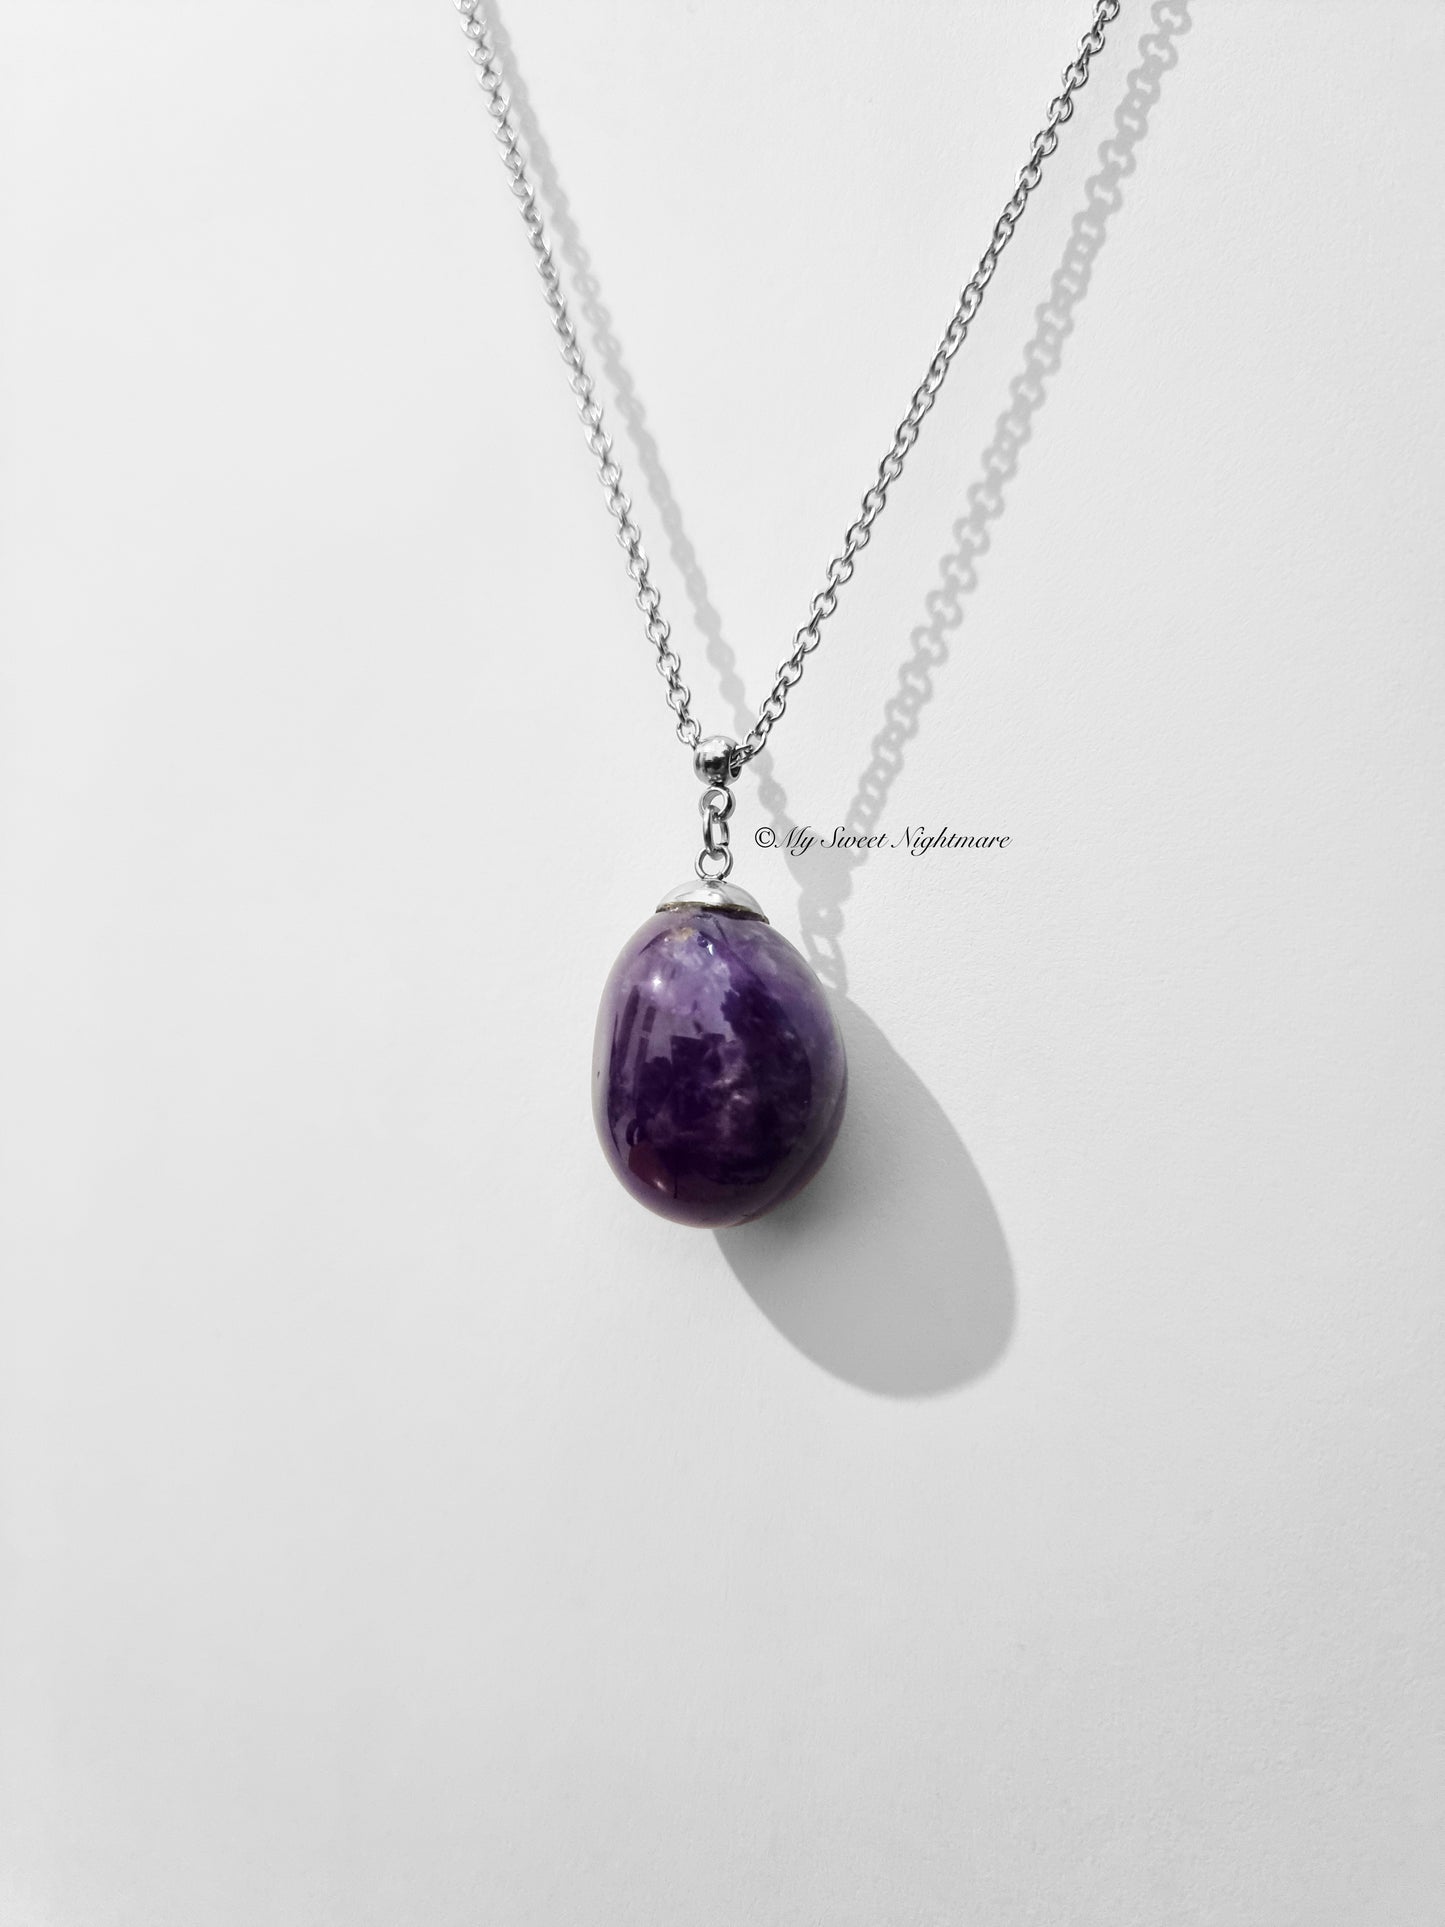 Pendant with natural tumbled Amethyst